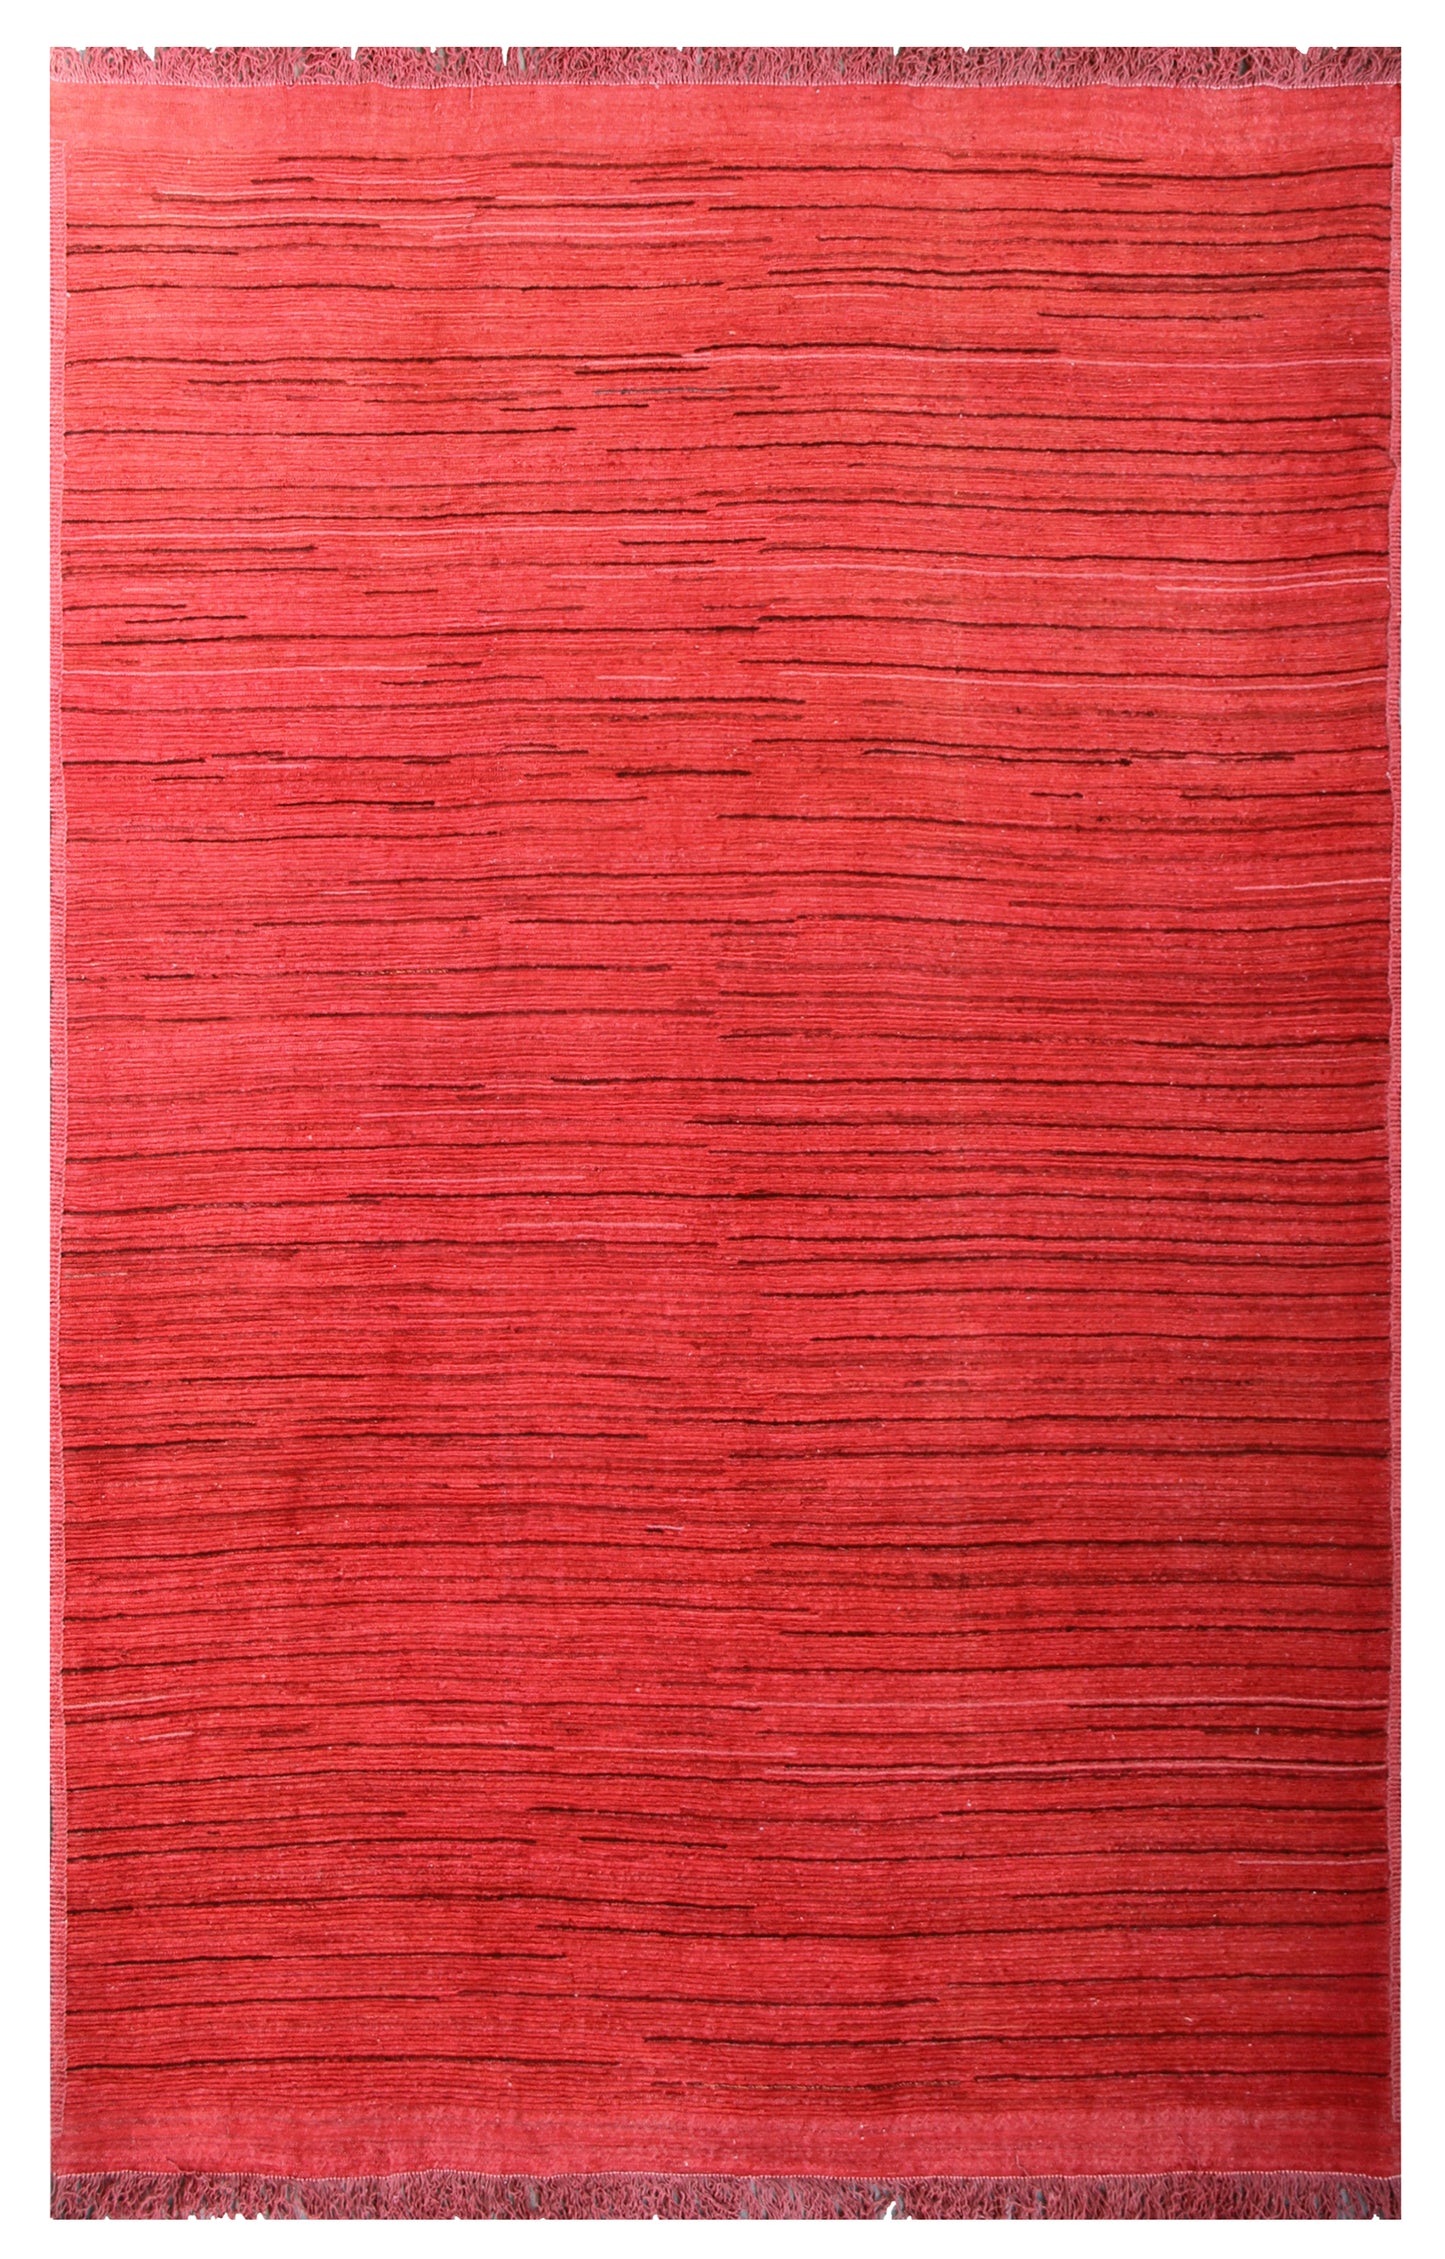 9'x12' Colorful Red Hand-Woven Overdye Ariana Barchi Rug